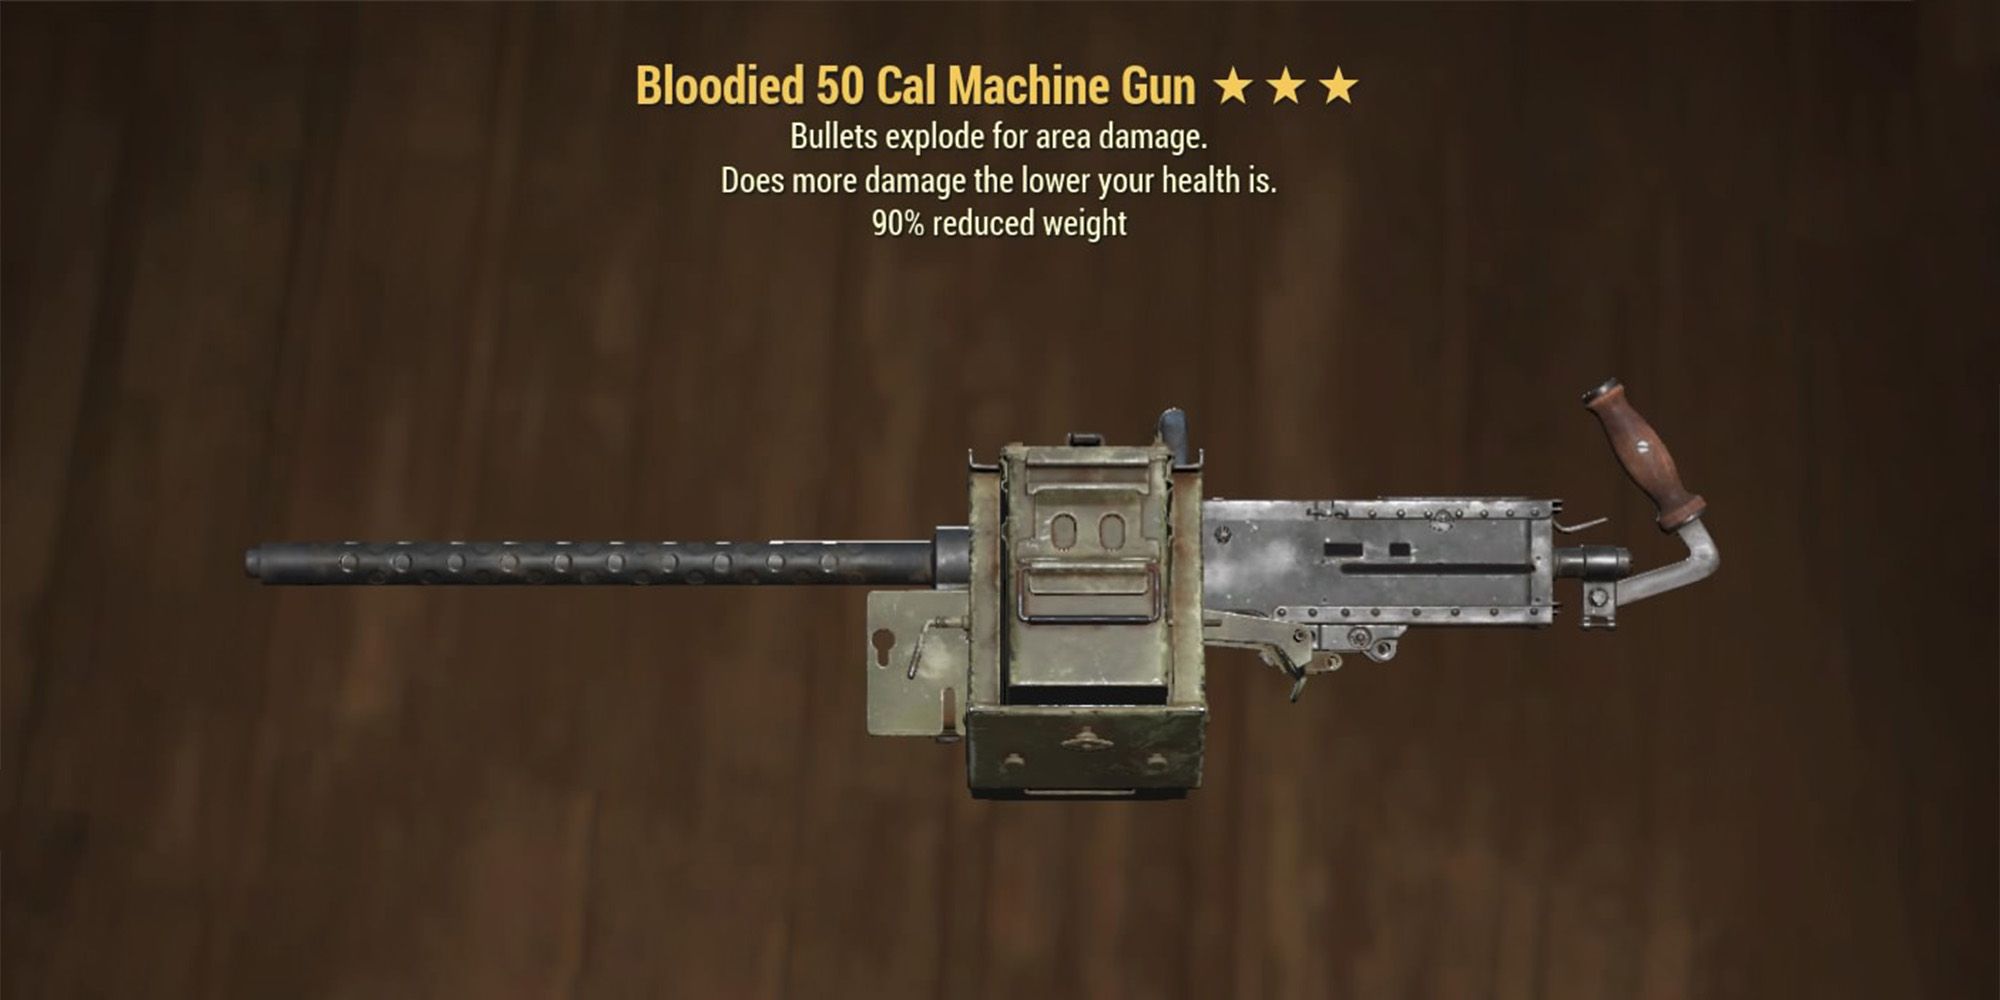 Bloodied 50 Cal Machine Gun from Fallout 76.